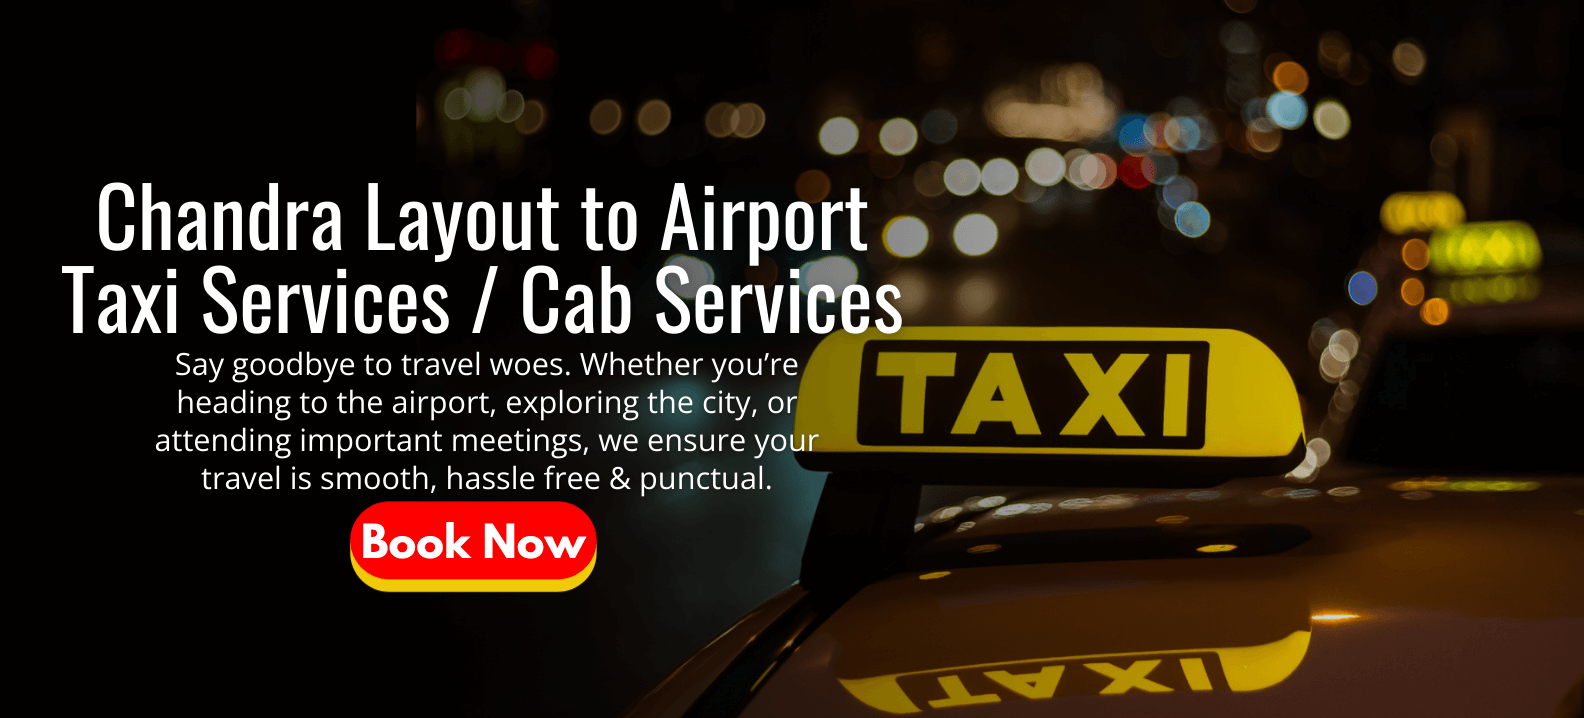 Chandra Layout to Airport Taxi Services _ Cab Services